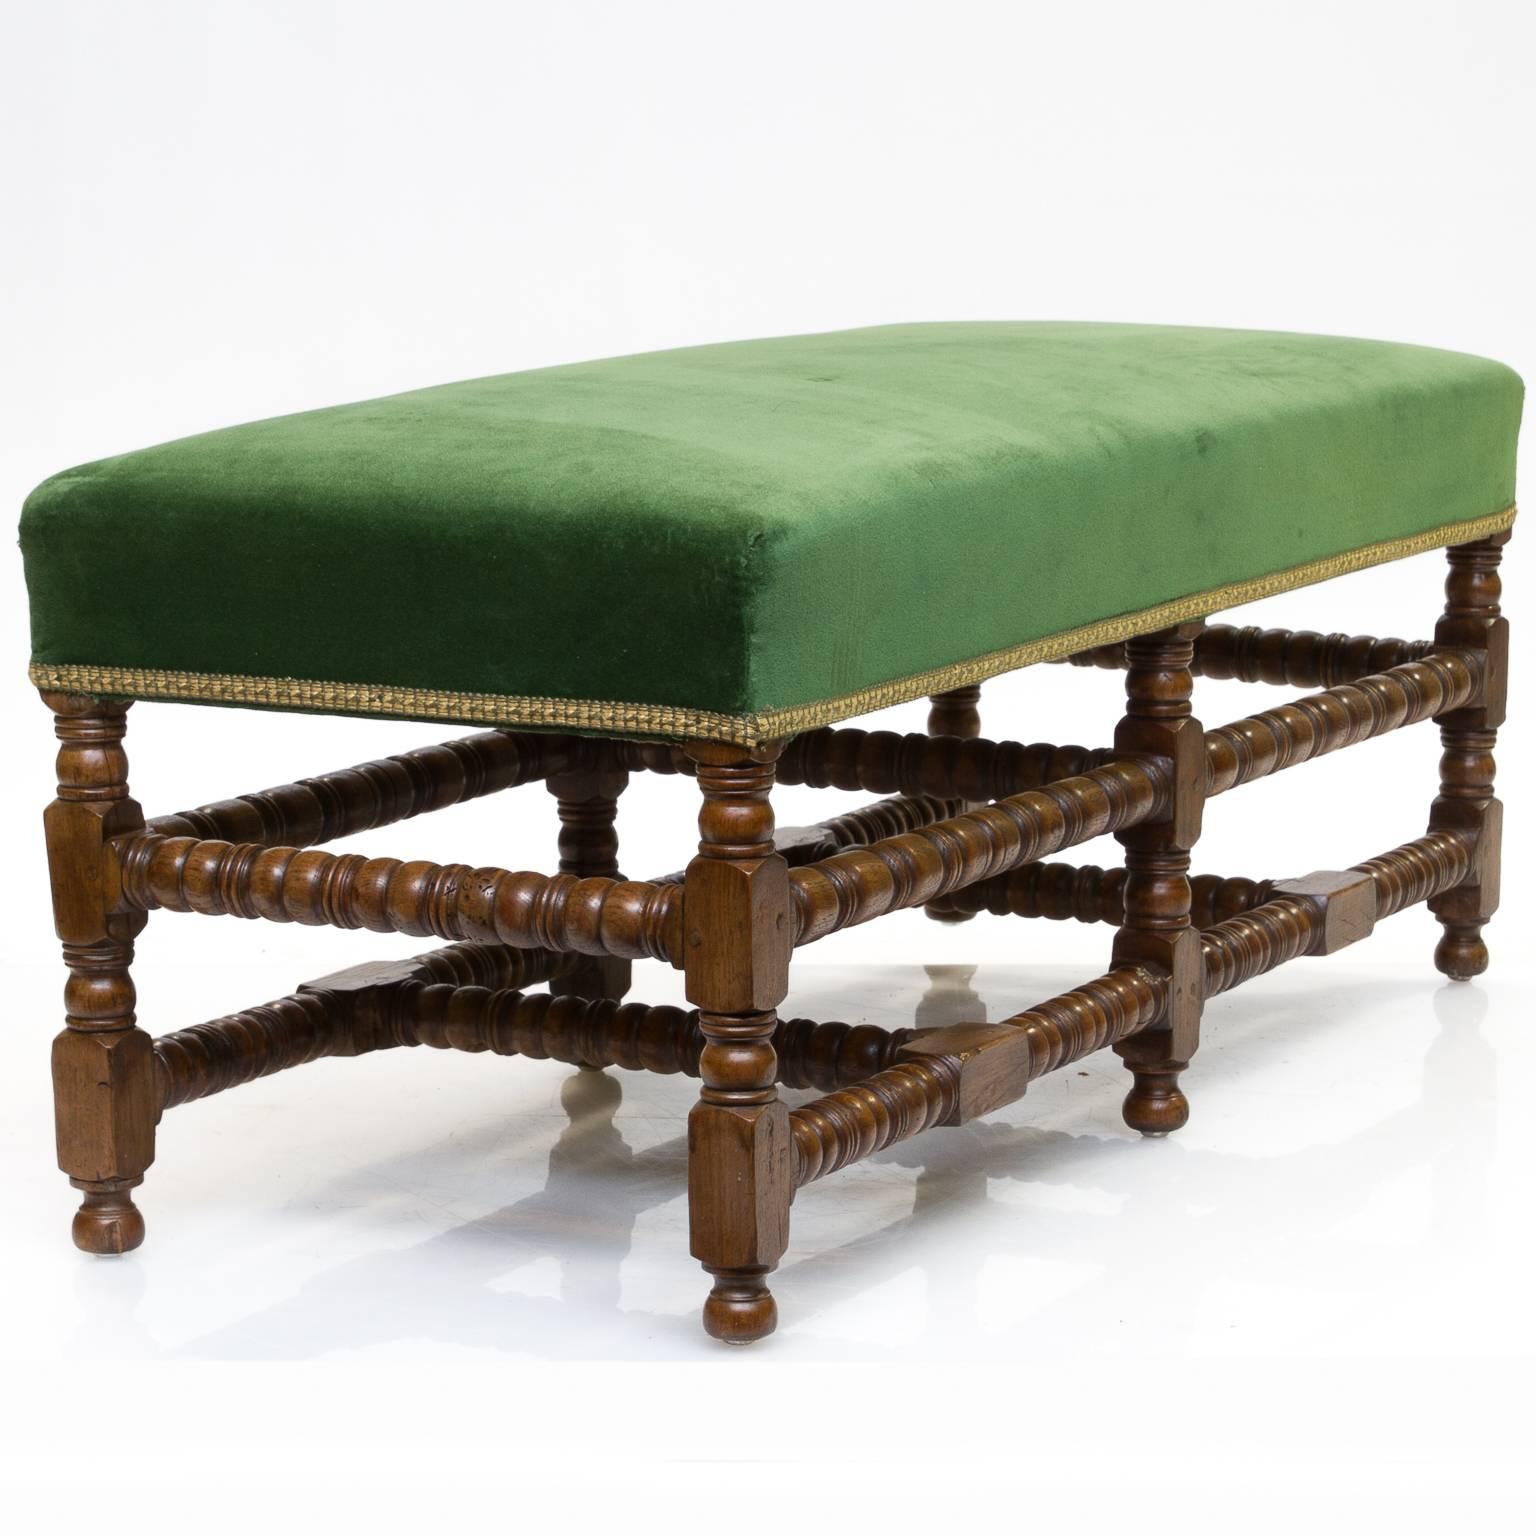 An English oak bench with a fine turned base. Very sturdy especially with the legs and stretchers support. Larger in scale comfortable for two individuals. A green velvet covering in very good condition or can be recover inexpensively. There are peg